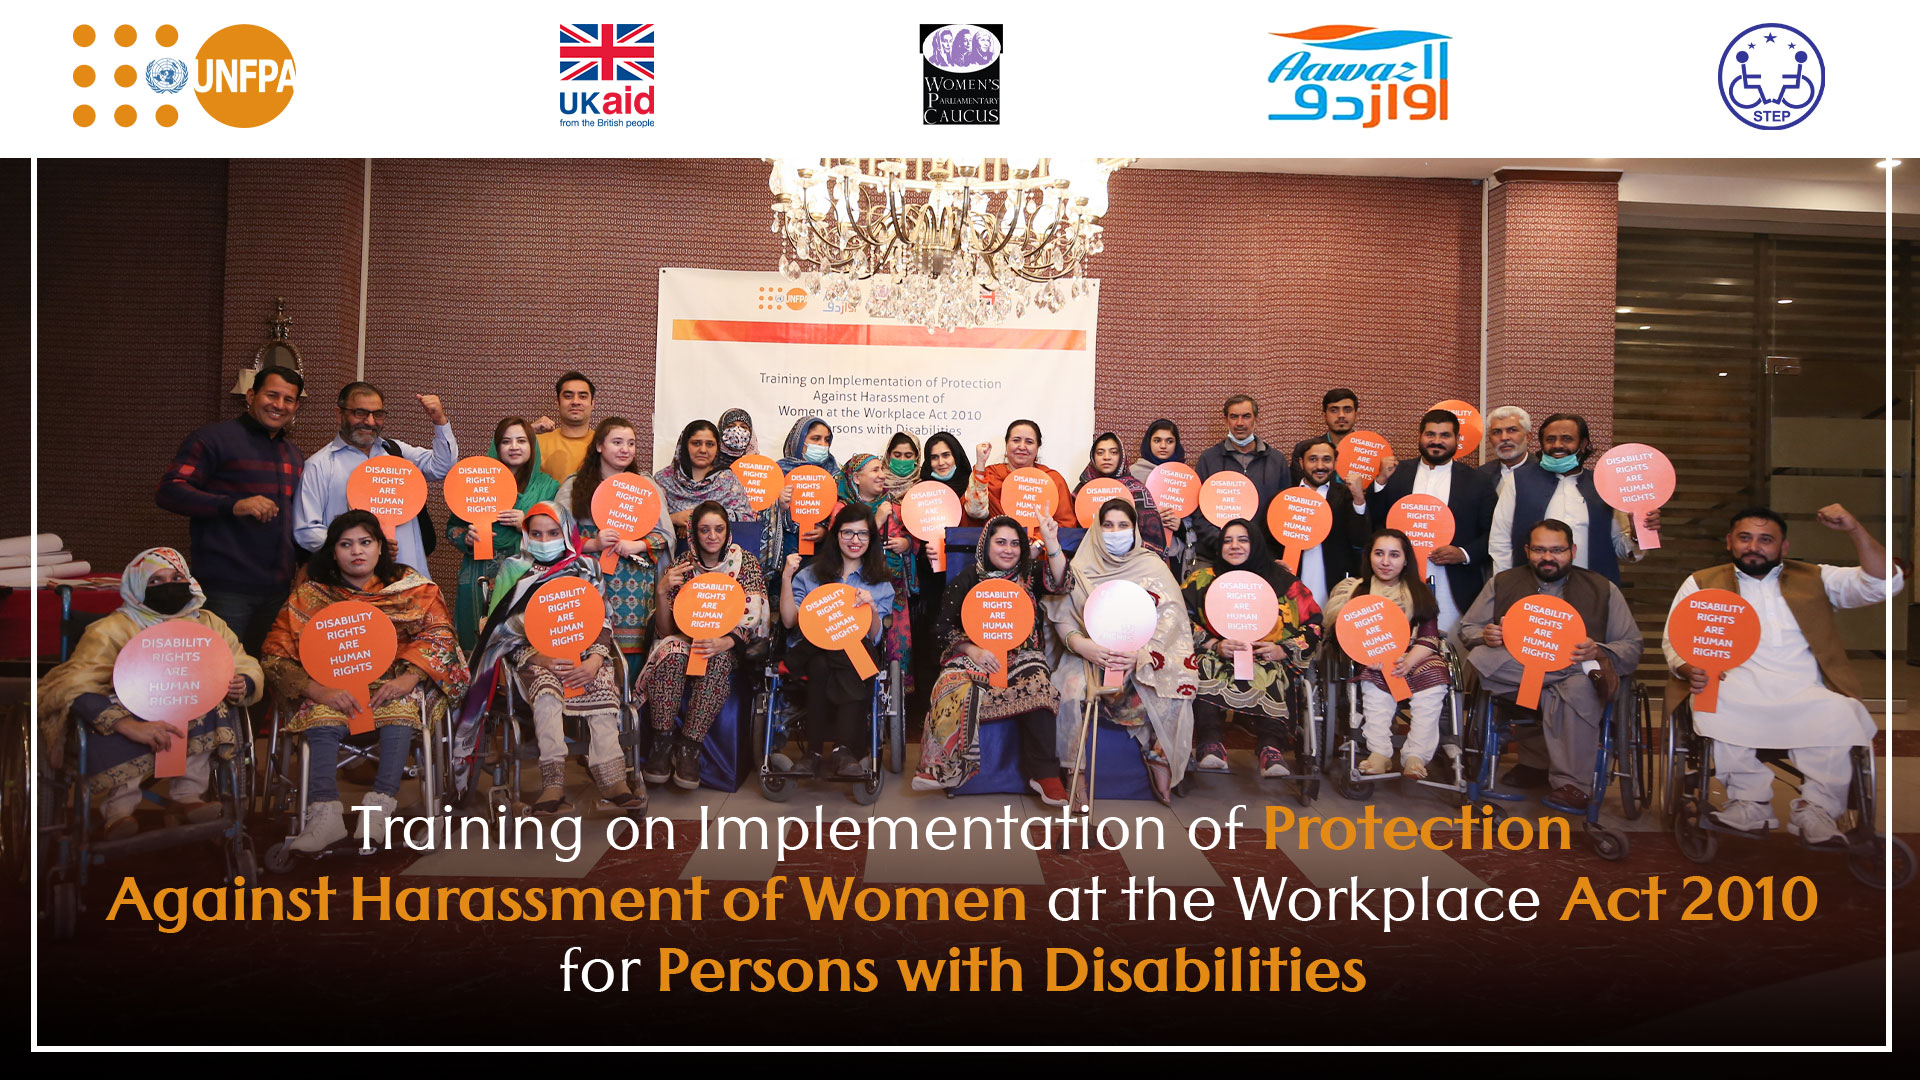 Group Picture of Training on Implementation of Protection Against Harassment of Women at the Workplace Act 2010 for Persons with Disabilities